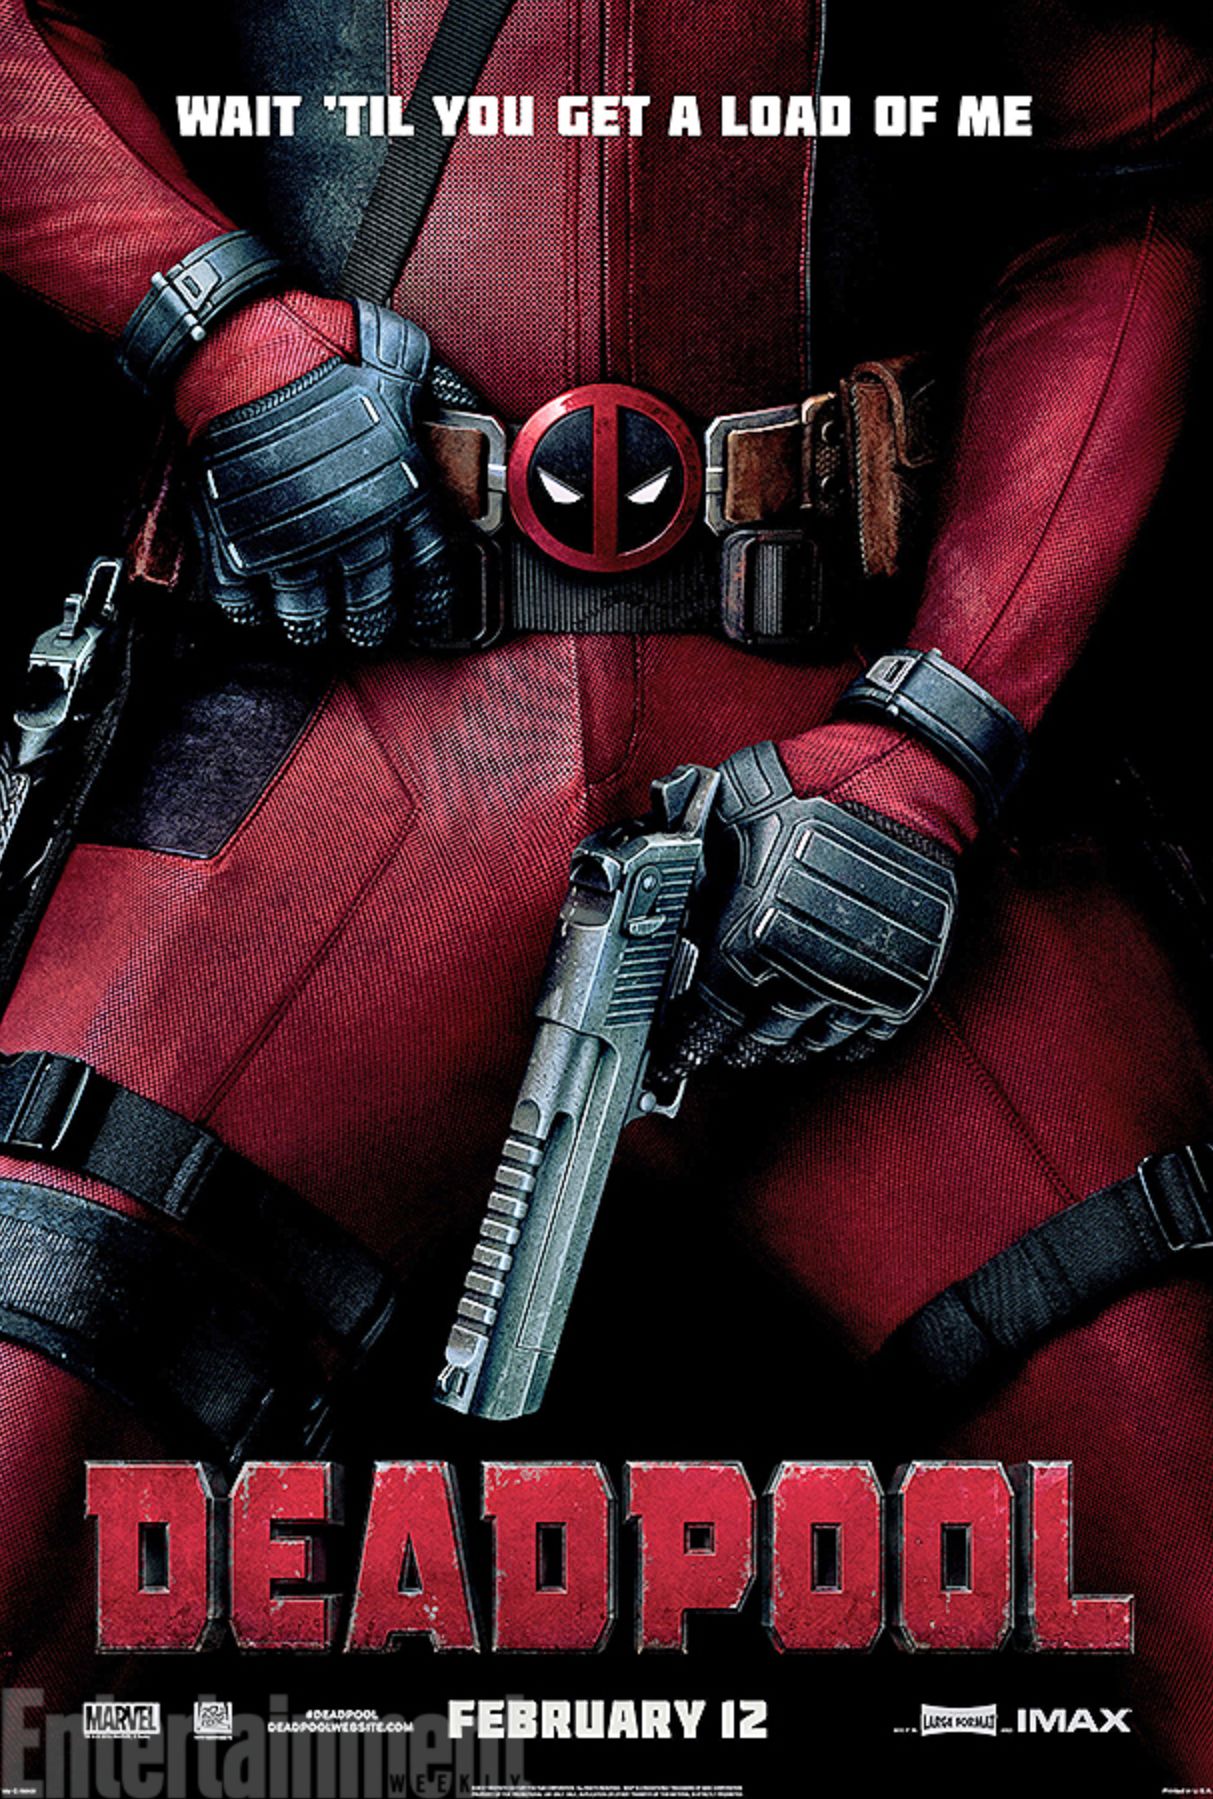 12 Days of Deadpool Kicks Off With a New Poster